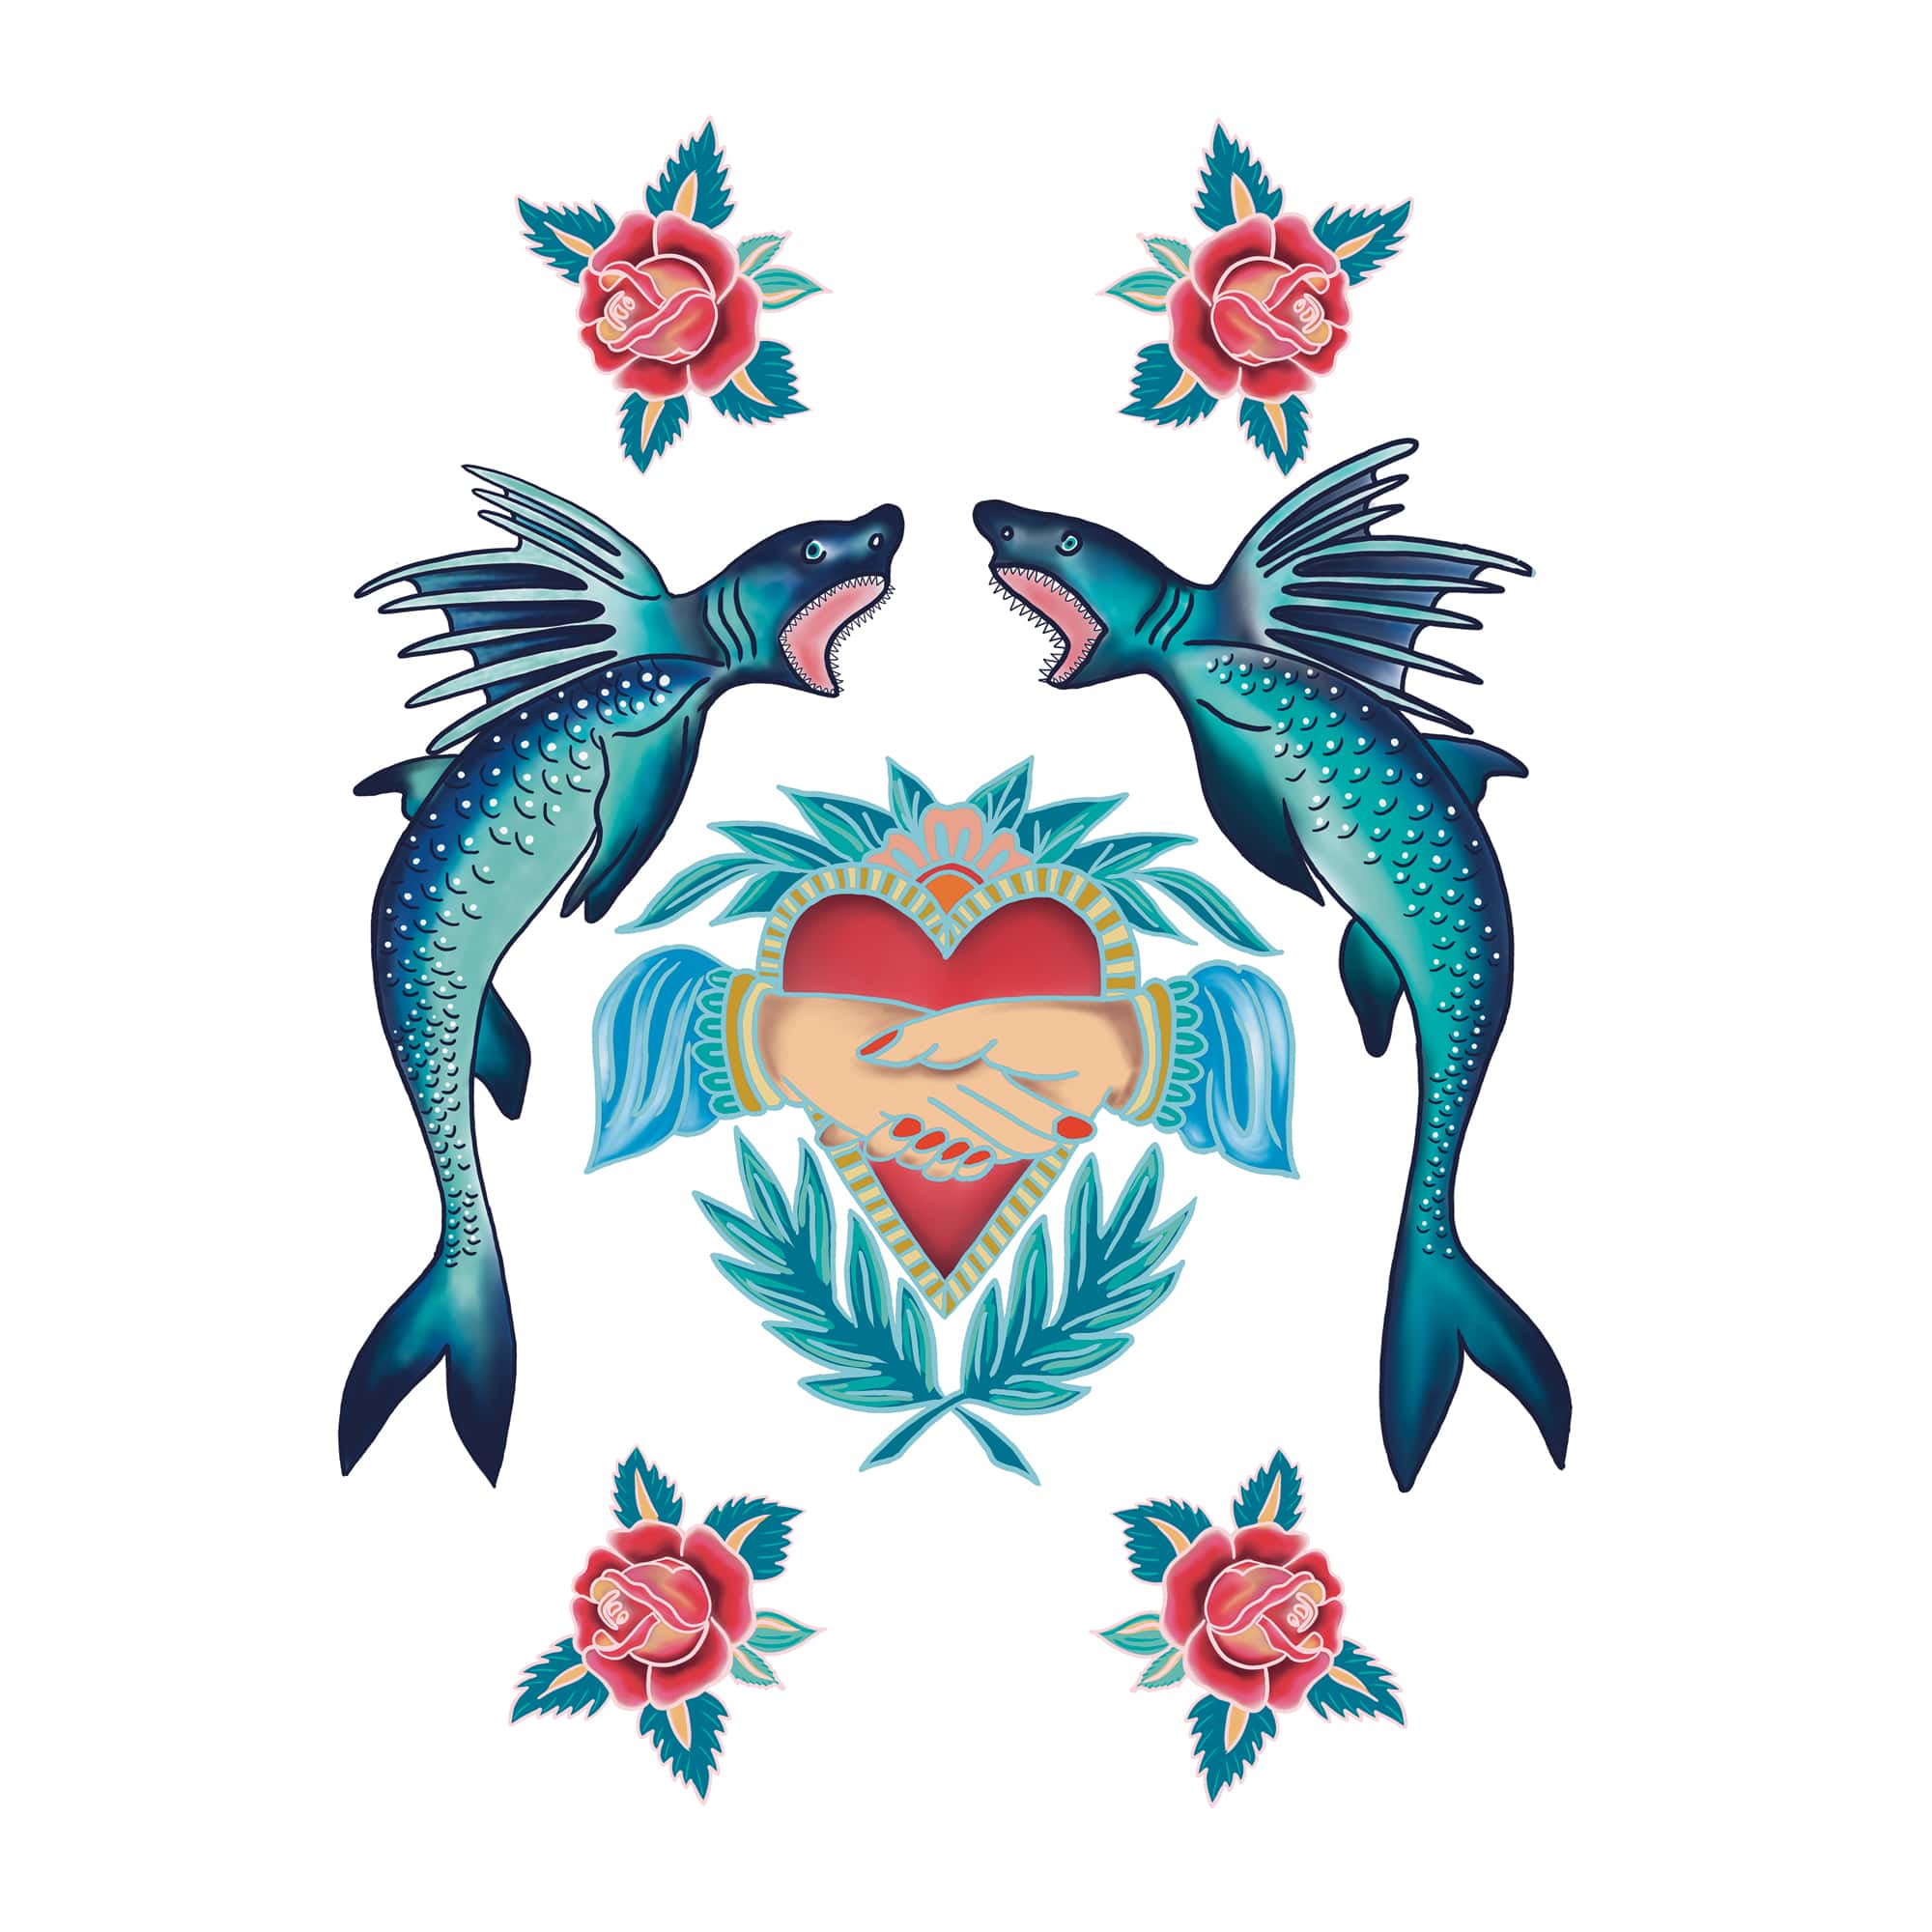 Sharks & Heart Art Print In Three Sizes - A4, A3 And A2